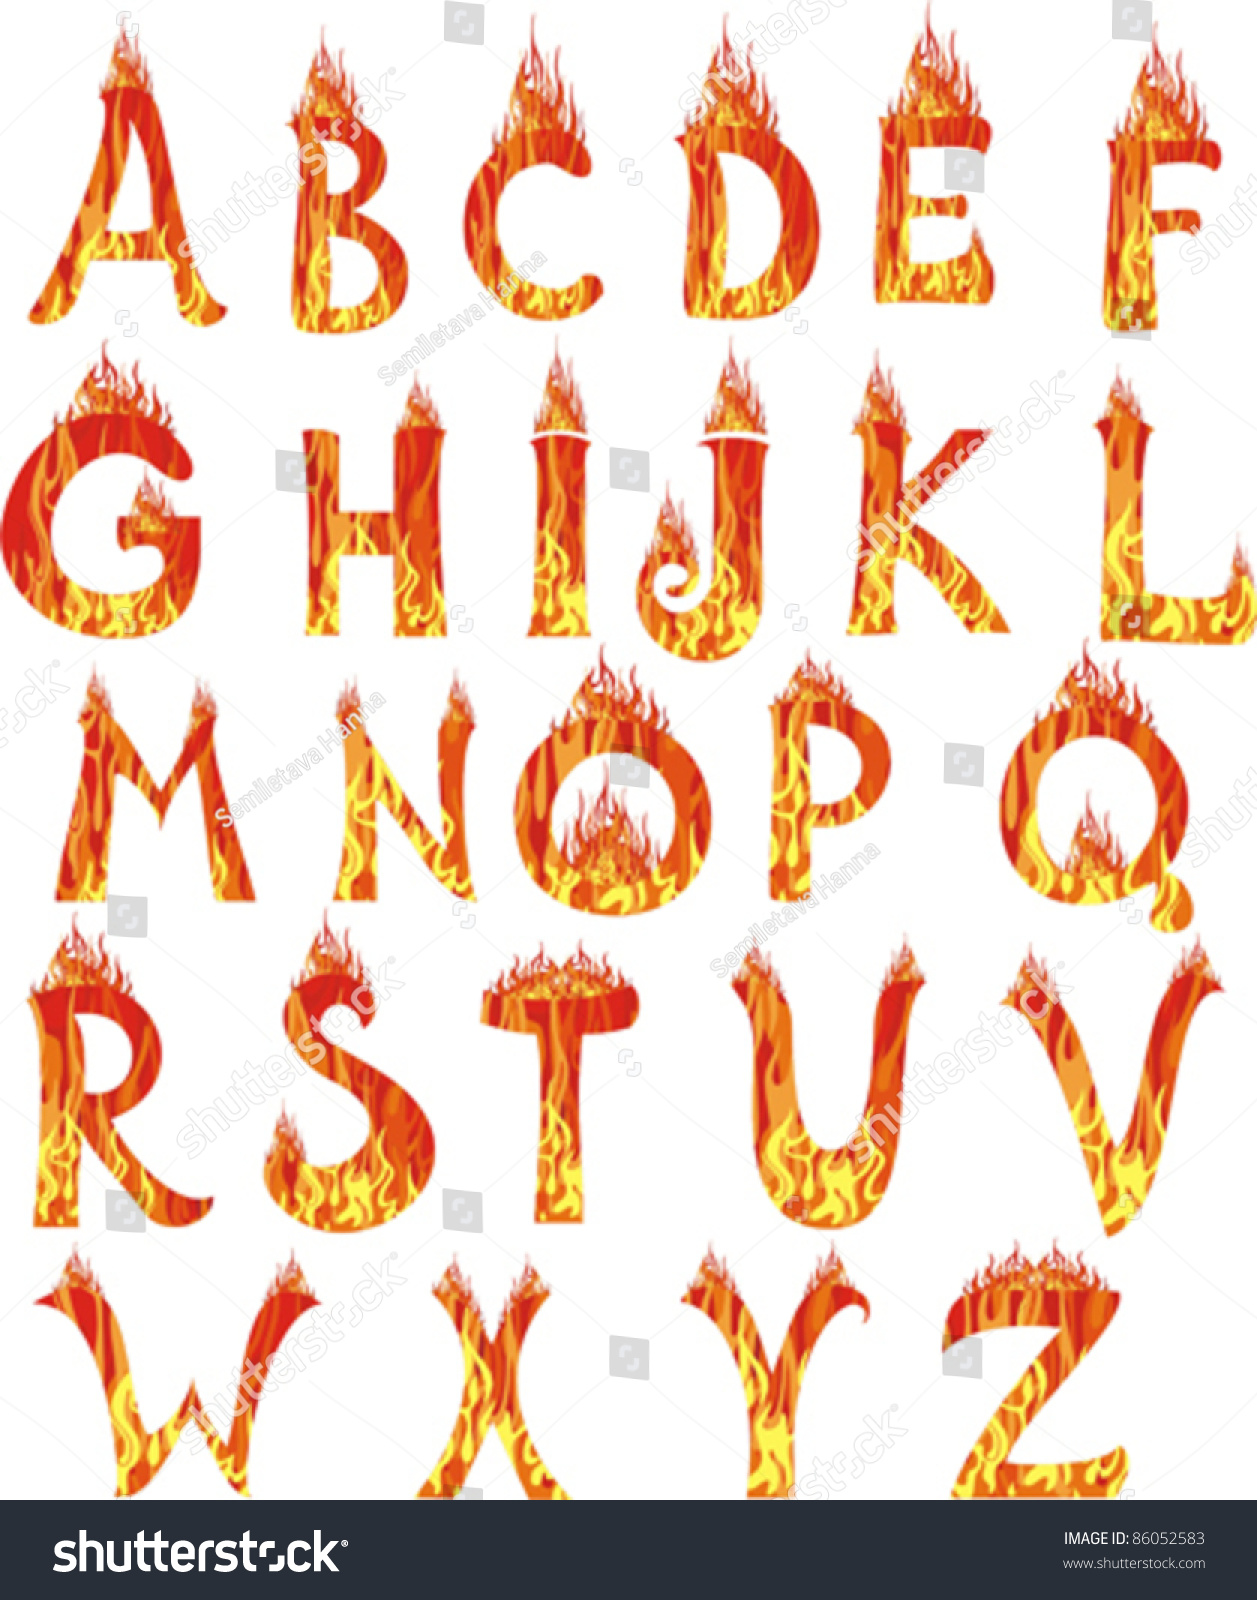 Abc Fire Letters Isolated On White Stock Vector 86052583 - Shutterstock